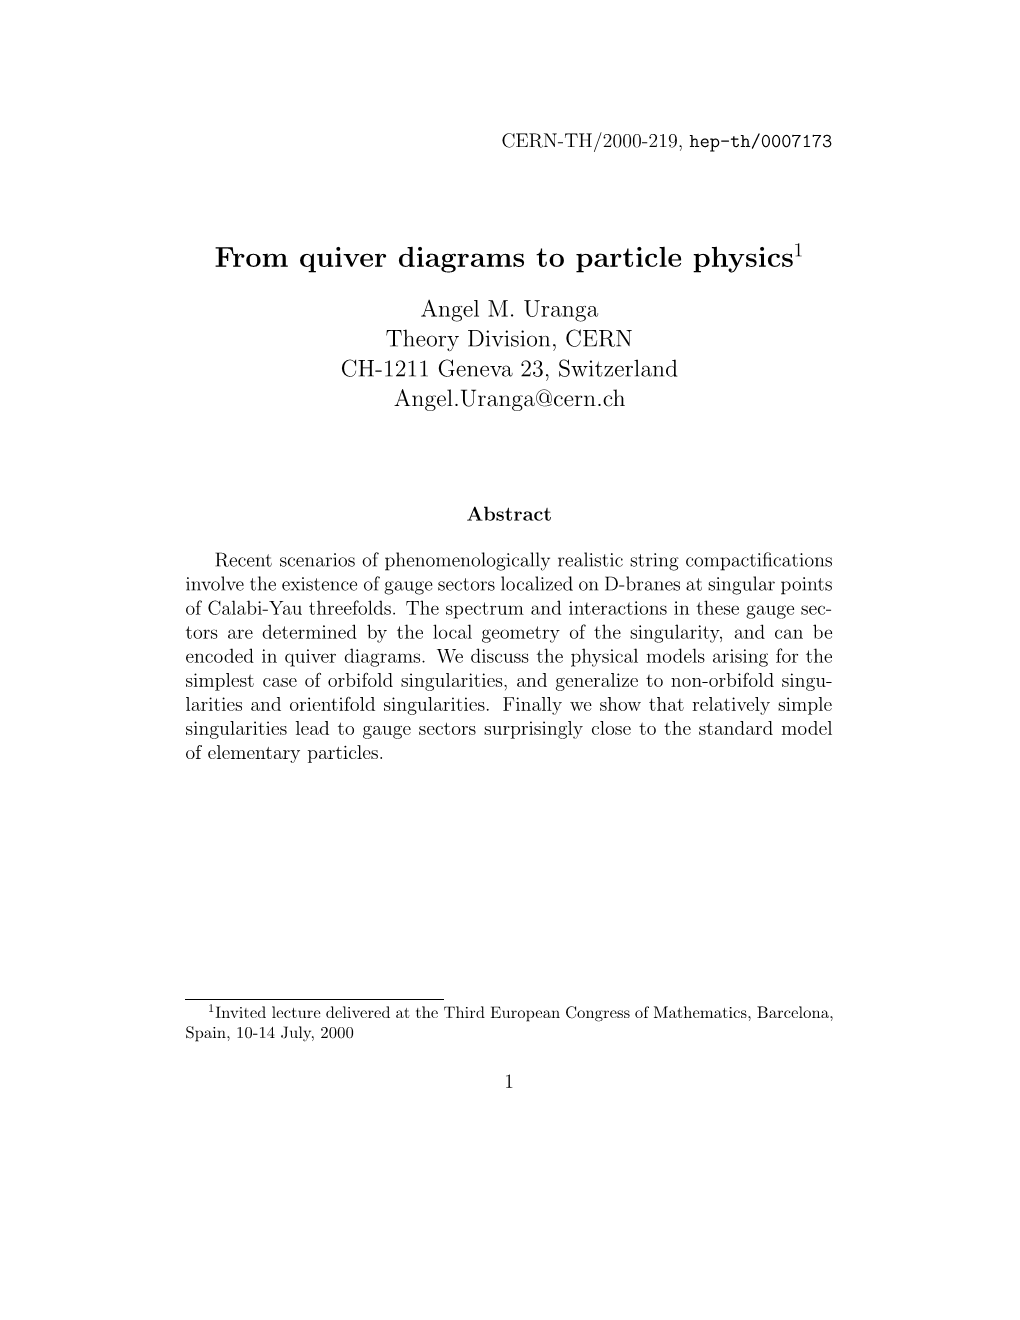 From Quiver Diagrams to Particle Physics1